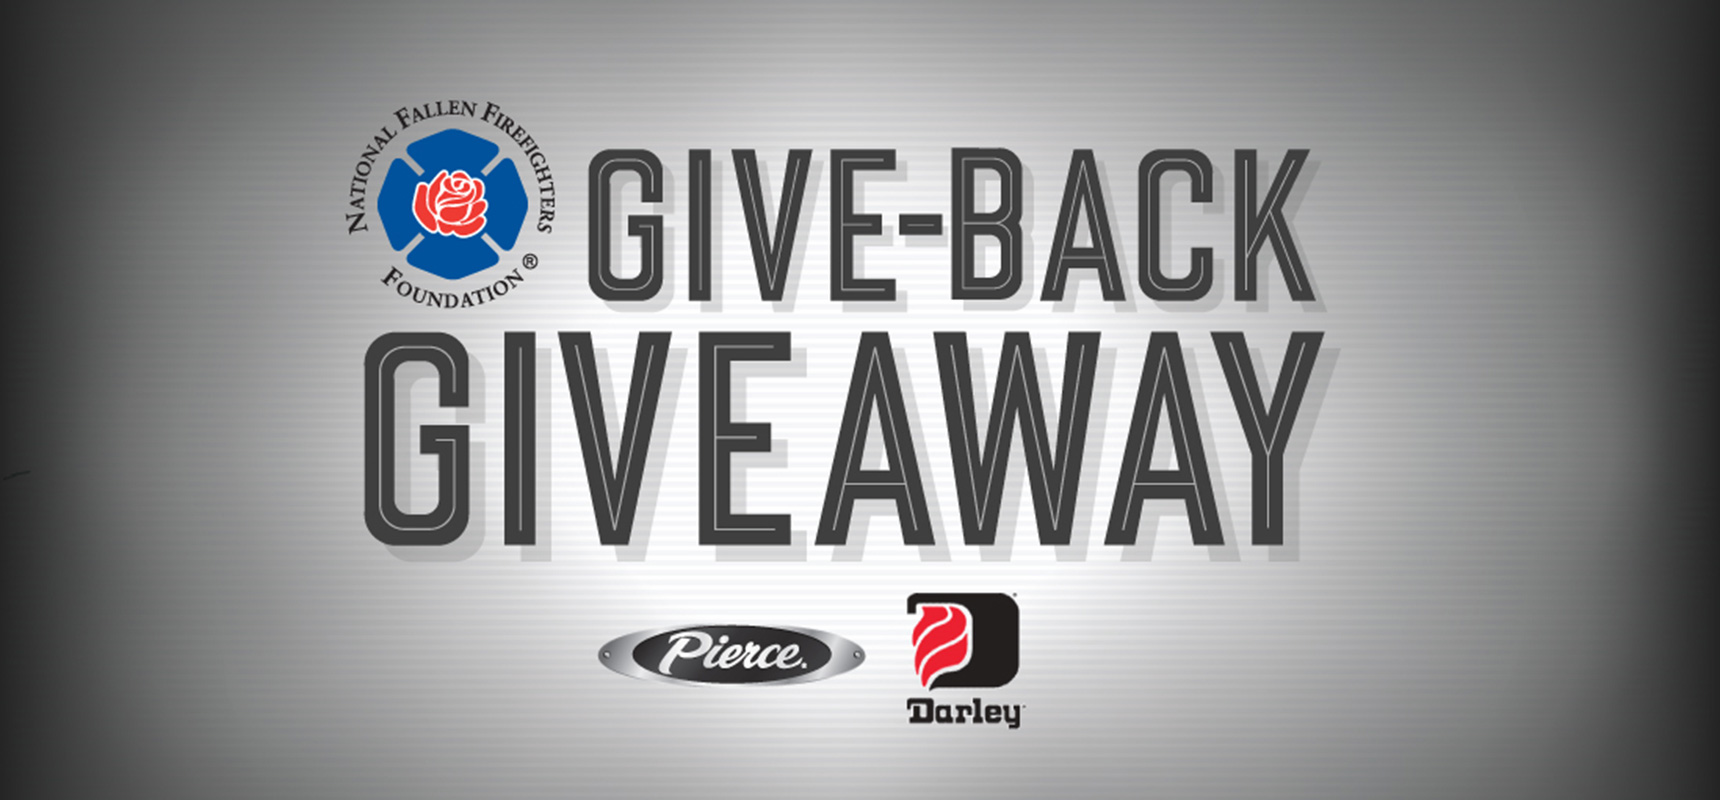 Pierce-and-Darley-announce-Give-Back-Giveaway-Sweepstakes-at-FDIC-to-Benefit-the-National-Fallen-Firefighters-Foundation-NFFF_Header.jpg